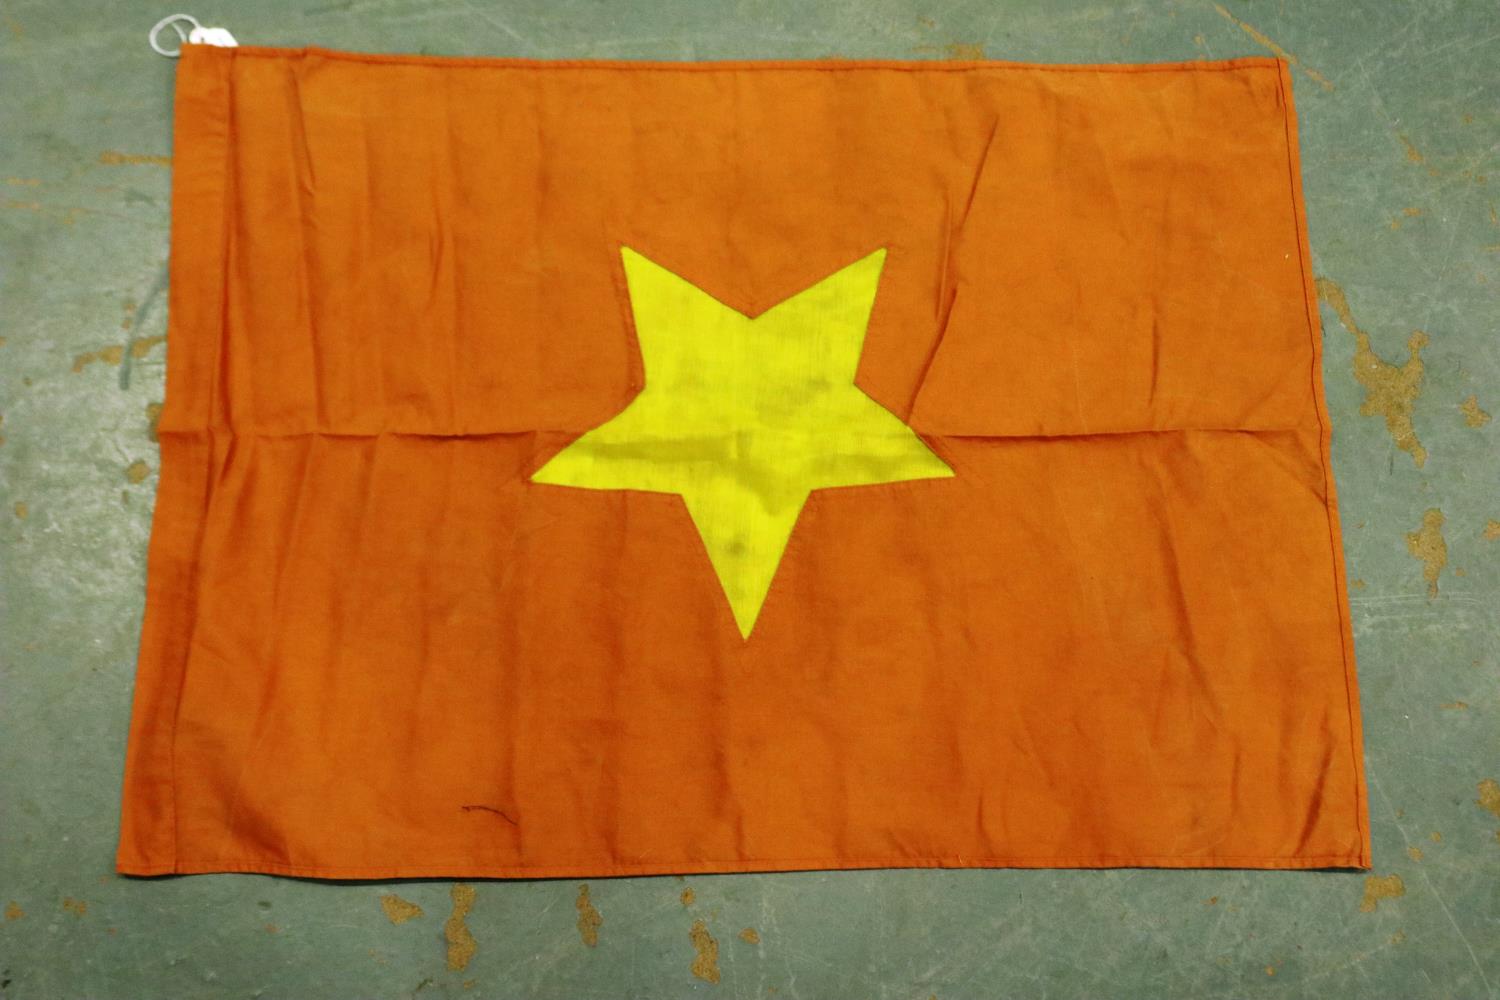 Vietnam War period N.V.A (North Vietnamese Army) flag, 55 x 75 cm. P&P Group 1 (£14+VAT for the - Image 2 of 2